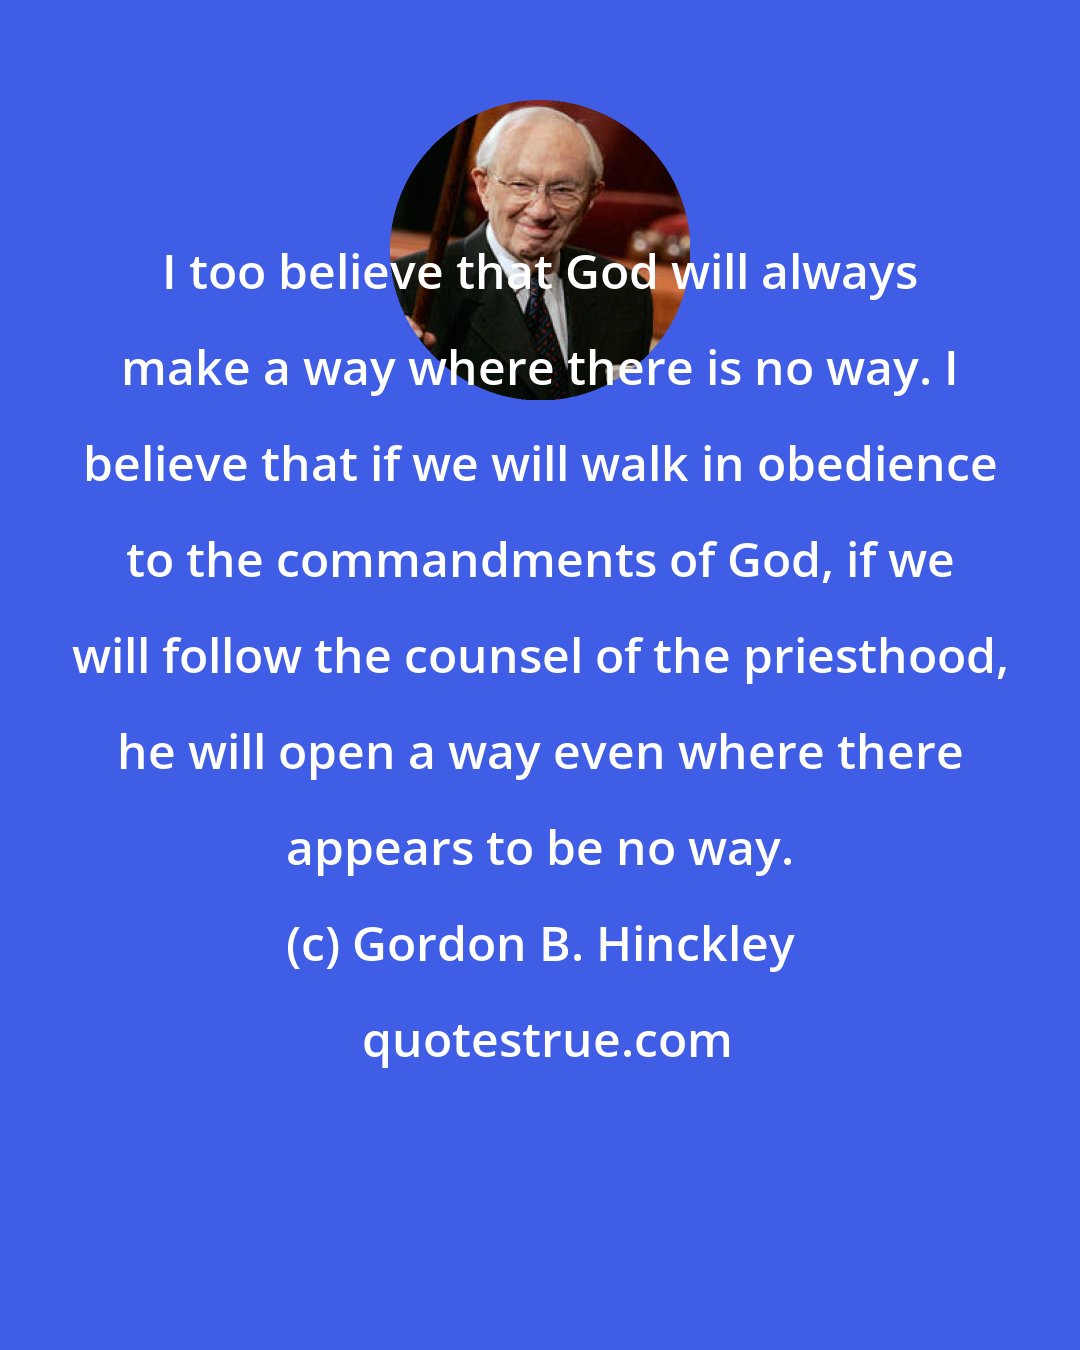 Gordon B. Hinckley: I too believe that God will always make a way where there is no way. I believe that if we will walk in obedience to the commandments of God, if we will follow the counsel of the priesthood, he will open a way even where there appears to be no way.